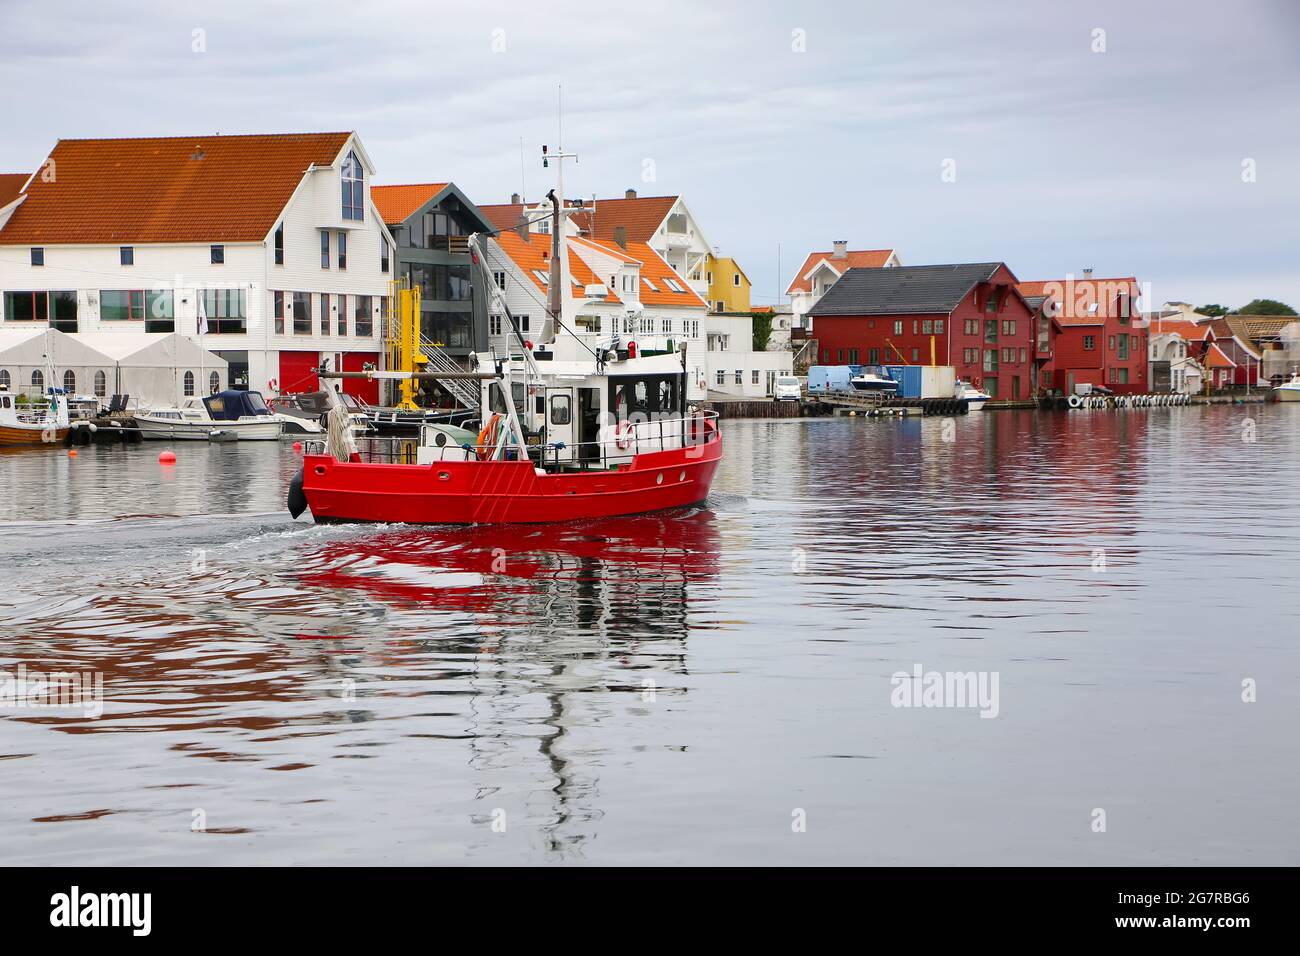 Typical fishing boat with traditional wooden buildings along the waterfront, river, and the marina. Smedasundet, town centre, Haugesund, Norway. Stock Photo